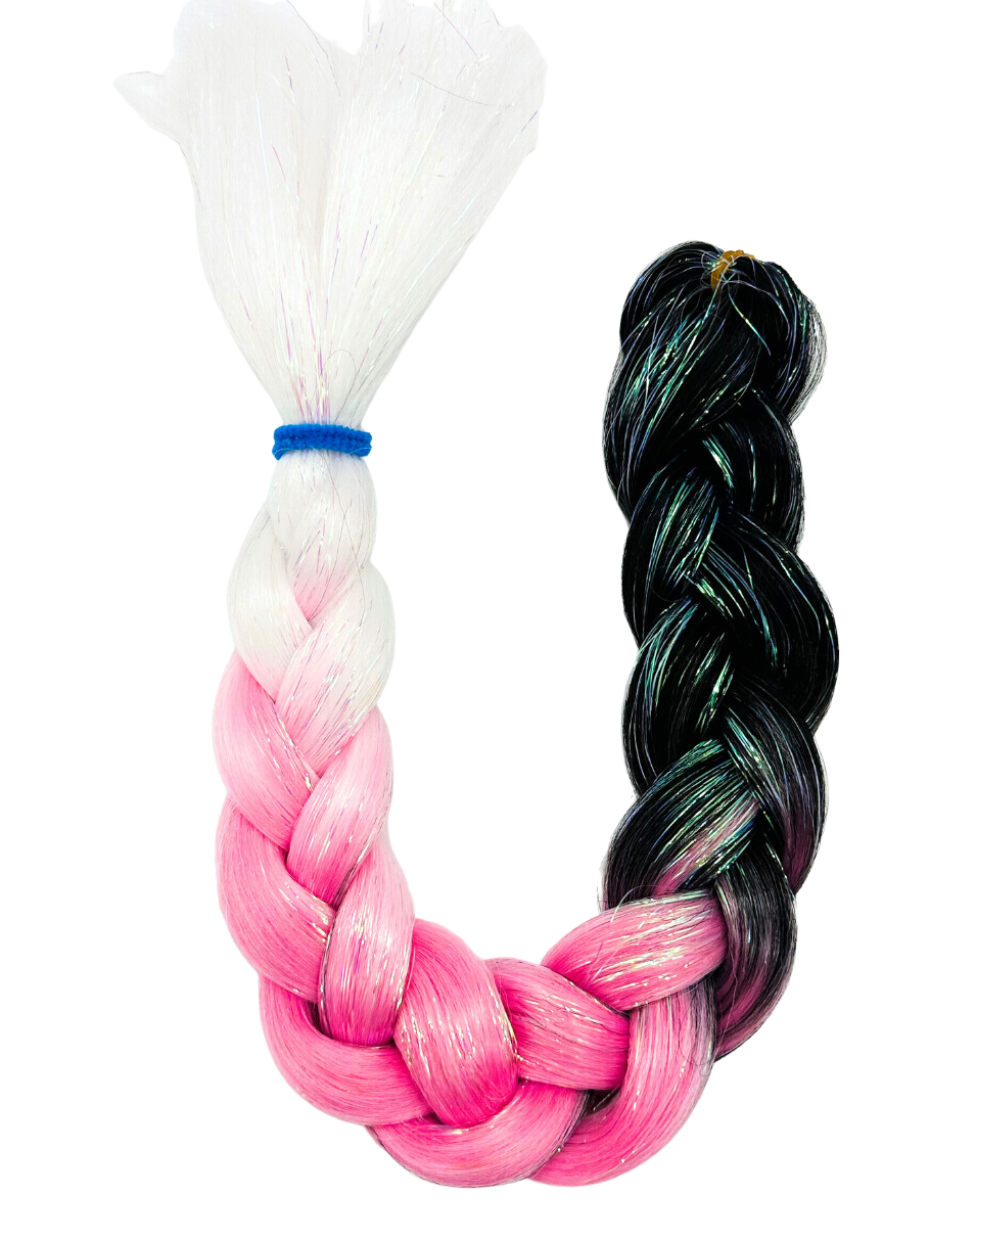 Candy Kiss - Black and Pink Ombré Hair Extension with Tinsel - Lunautics